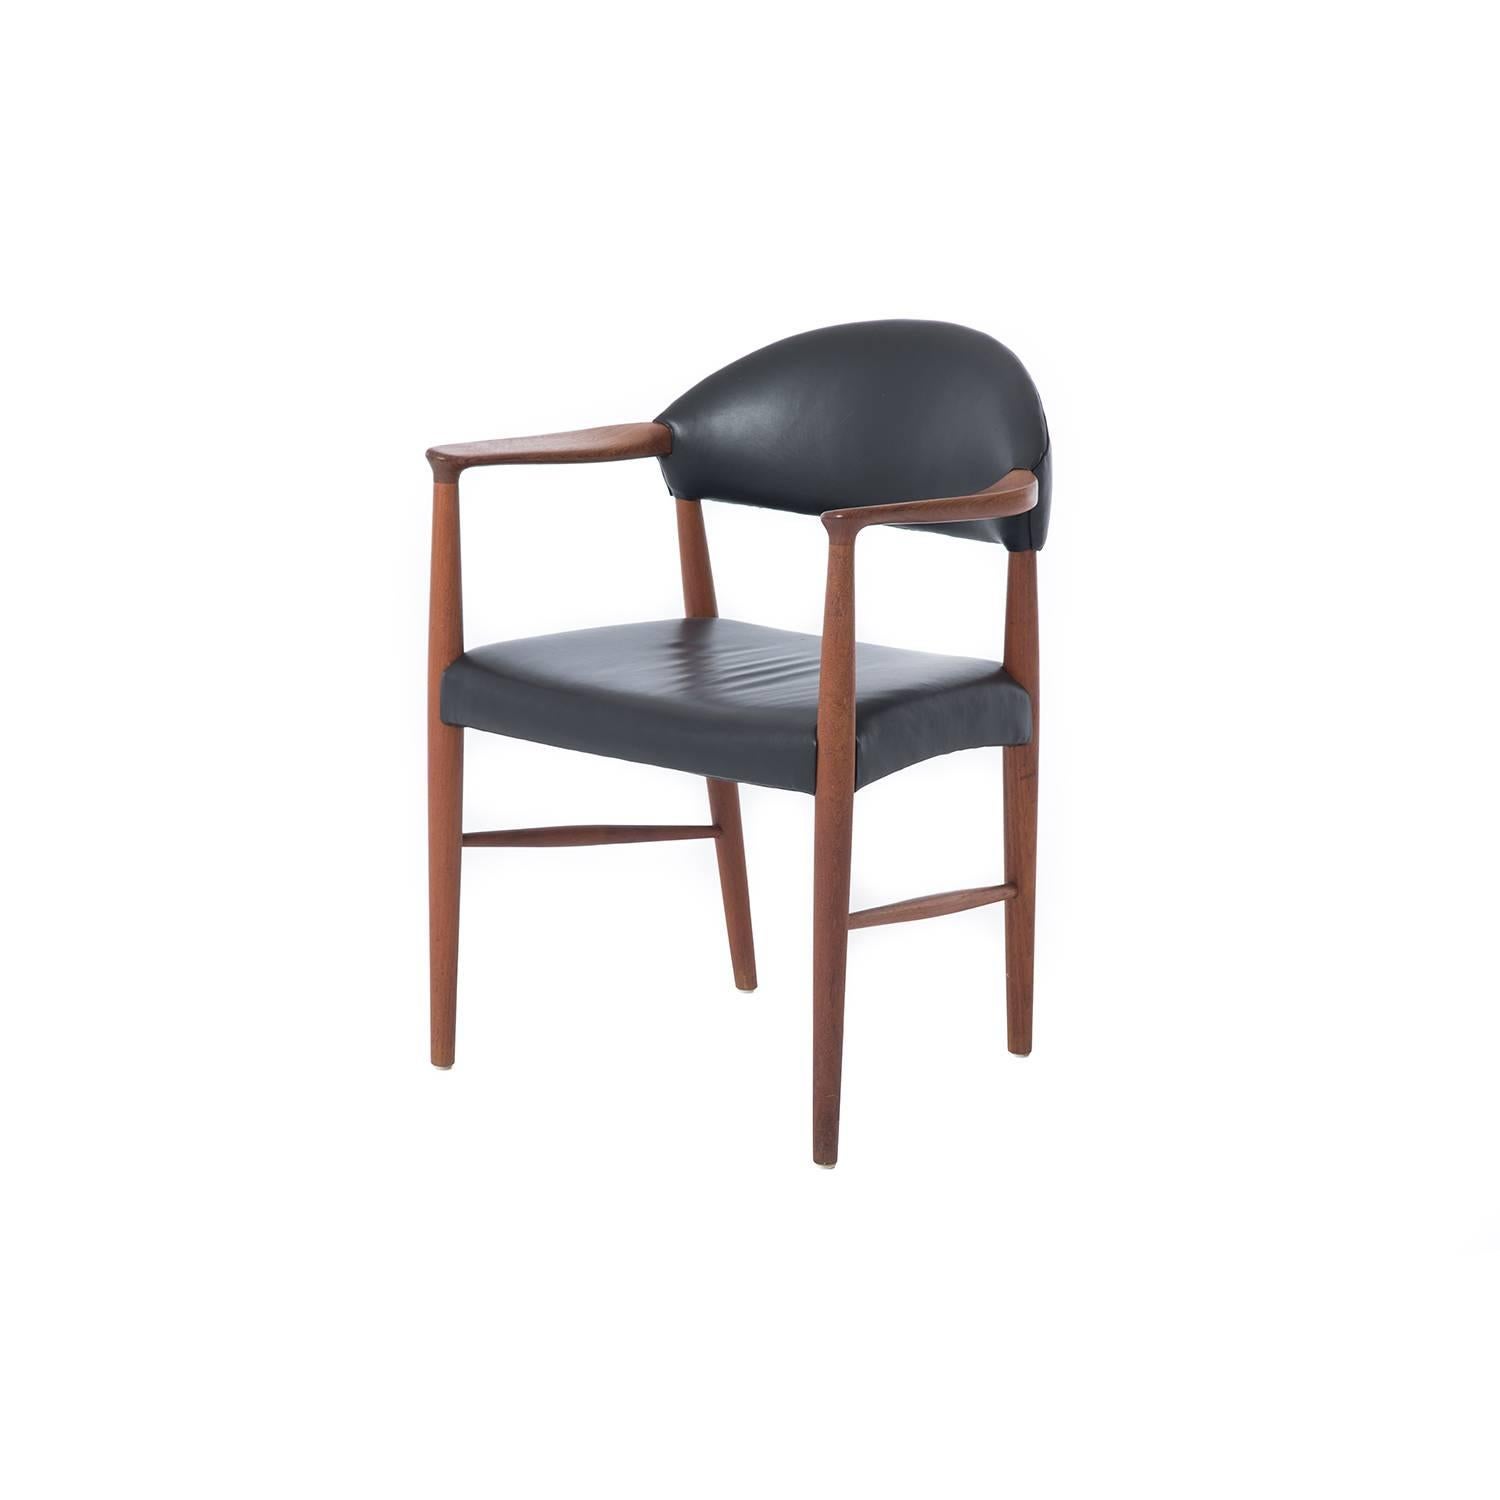 Easily incorporate this Classic teak and Hardy black leather chair into any living, dining, or office space.